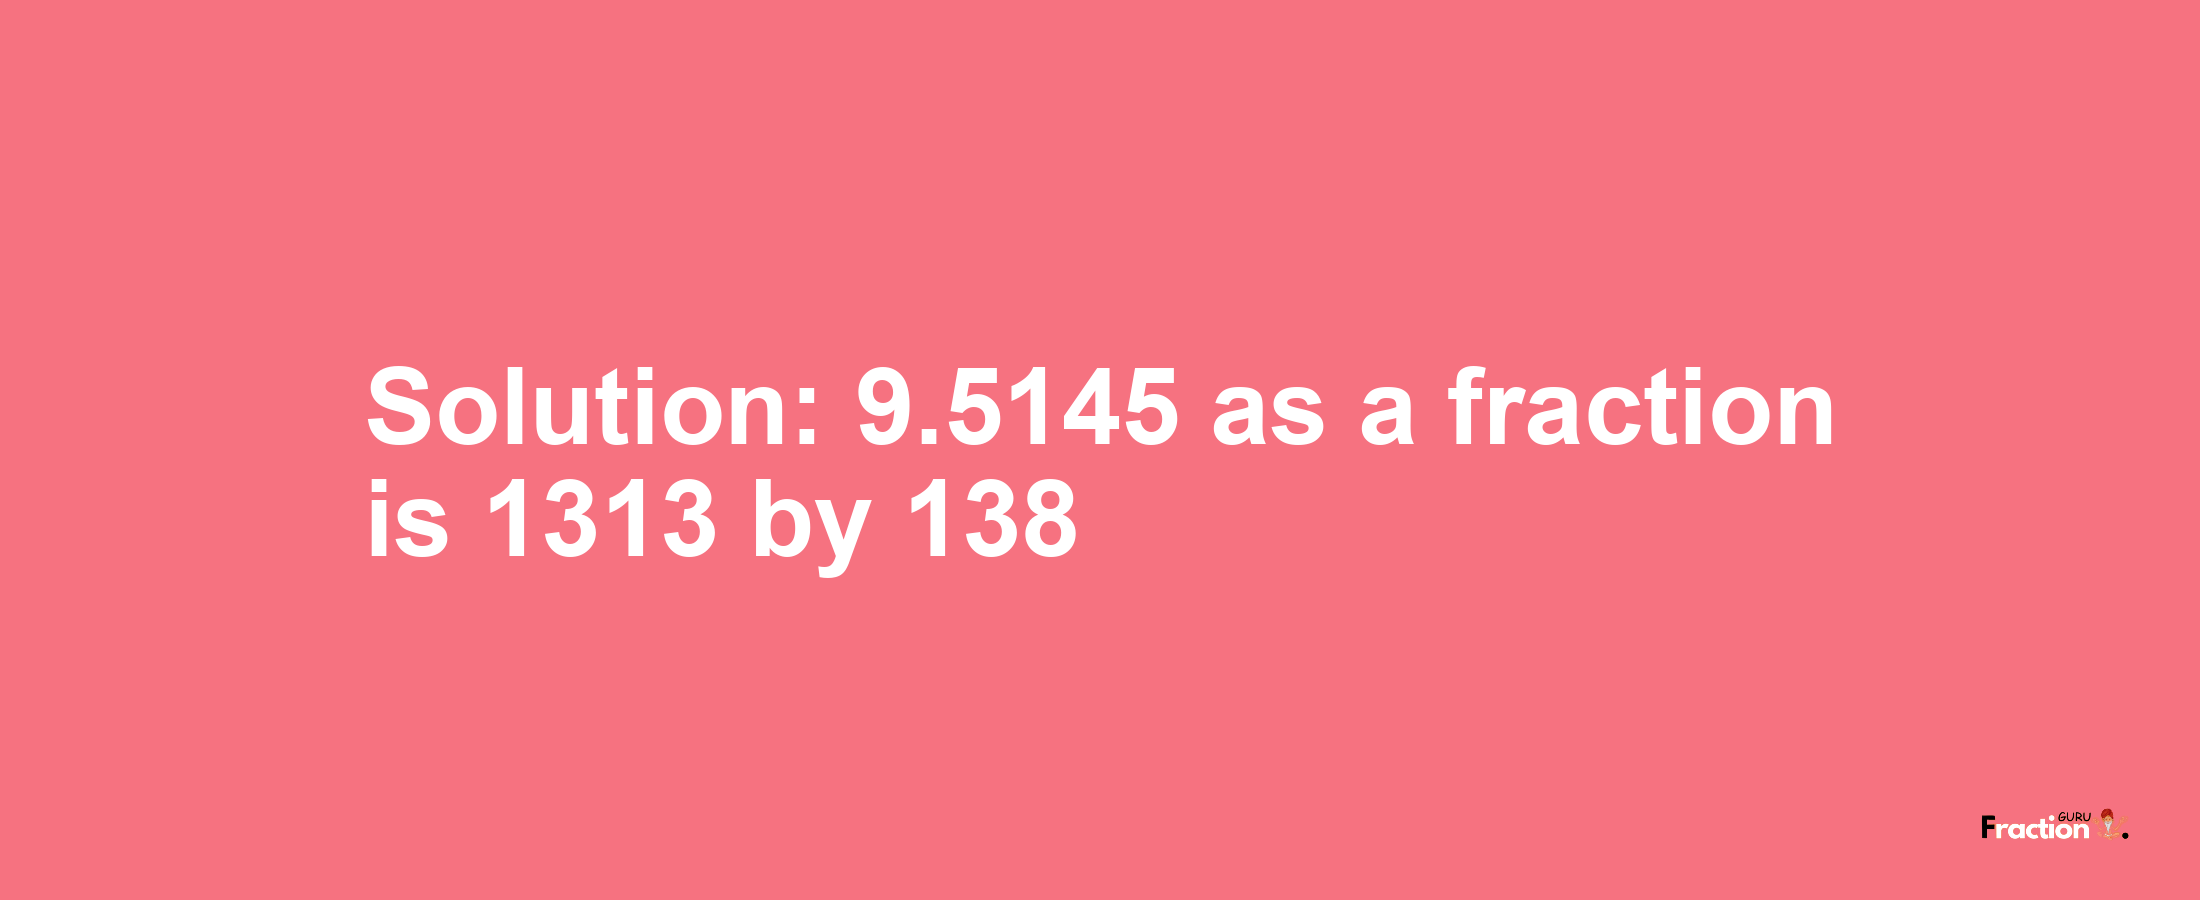 Solution:9.5145 as a fraction is 1313/138